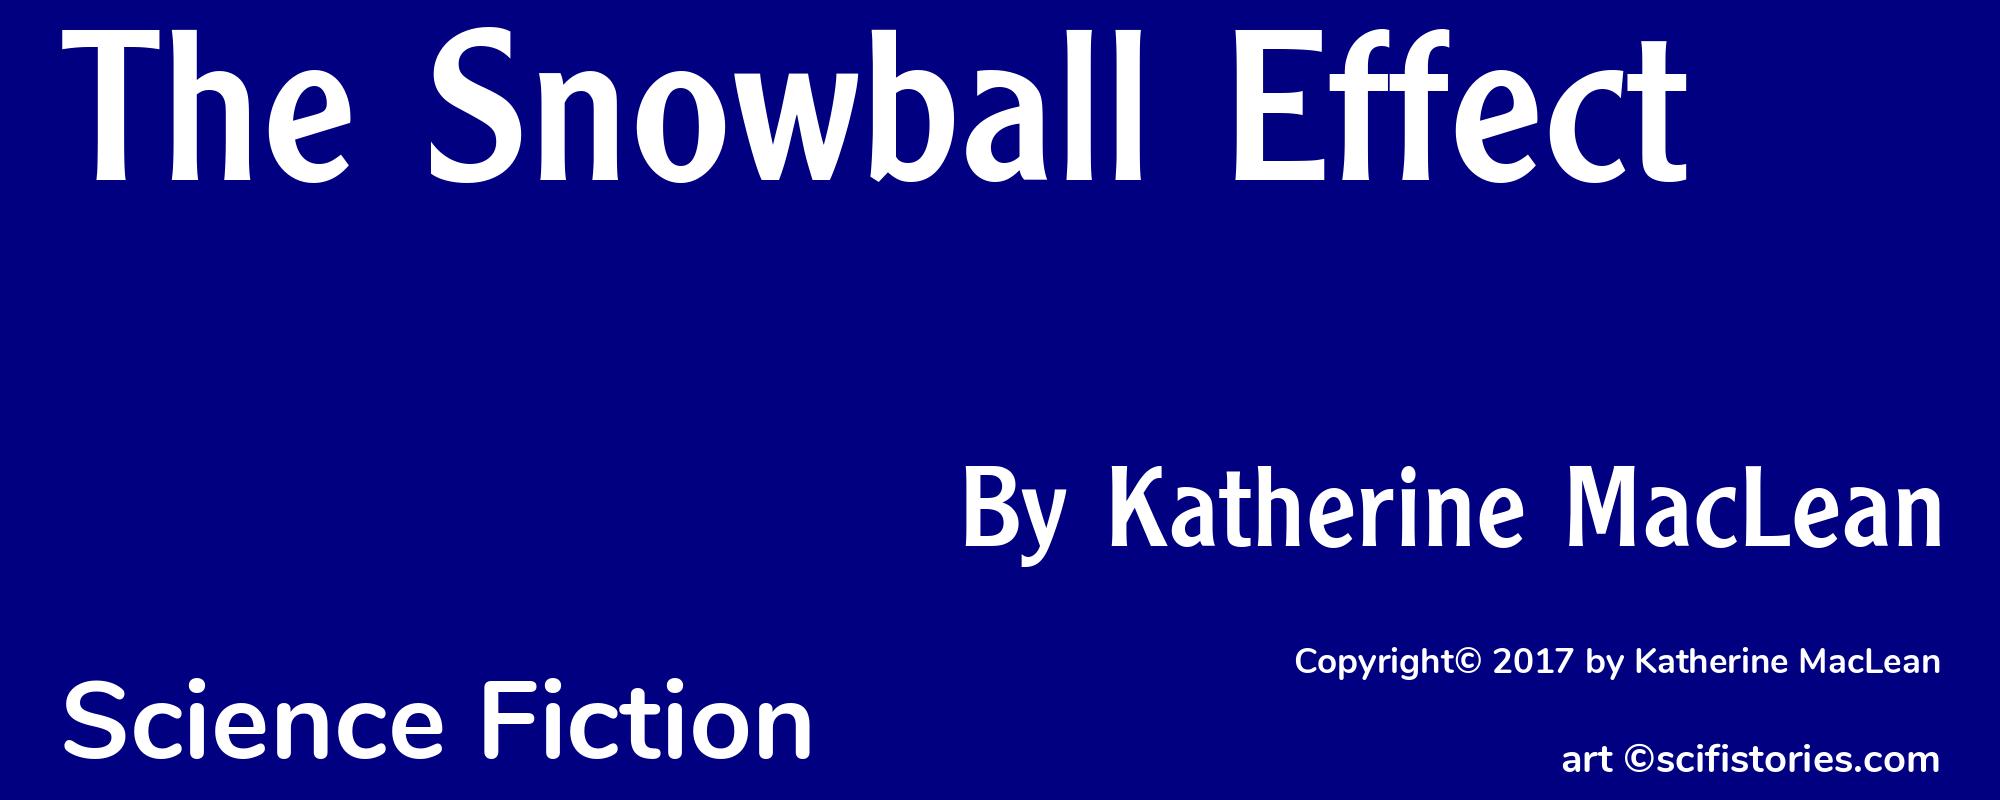 The Snowball Effect - Cover